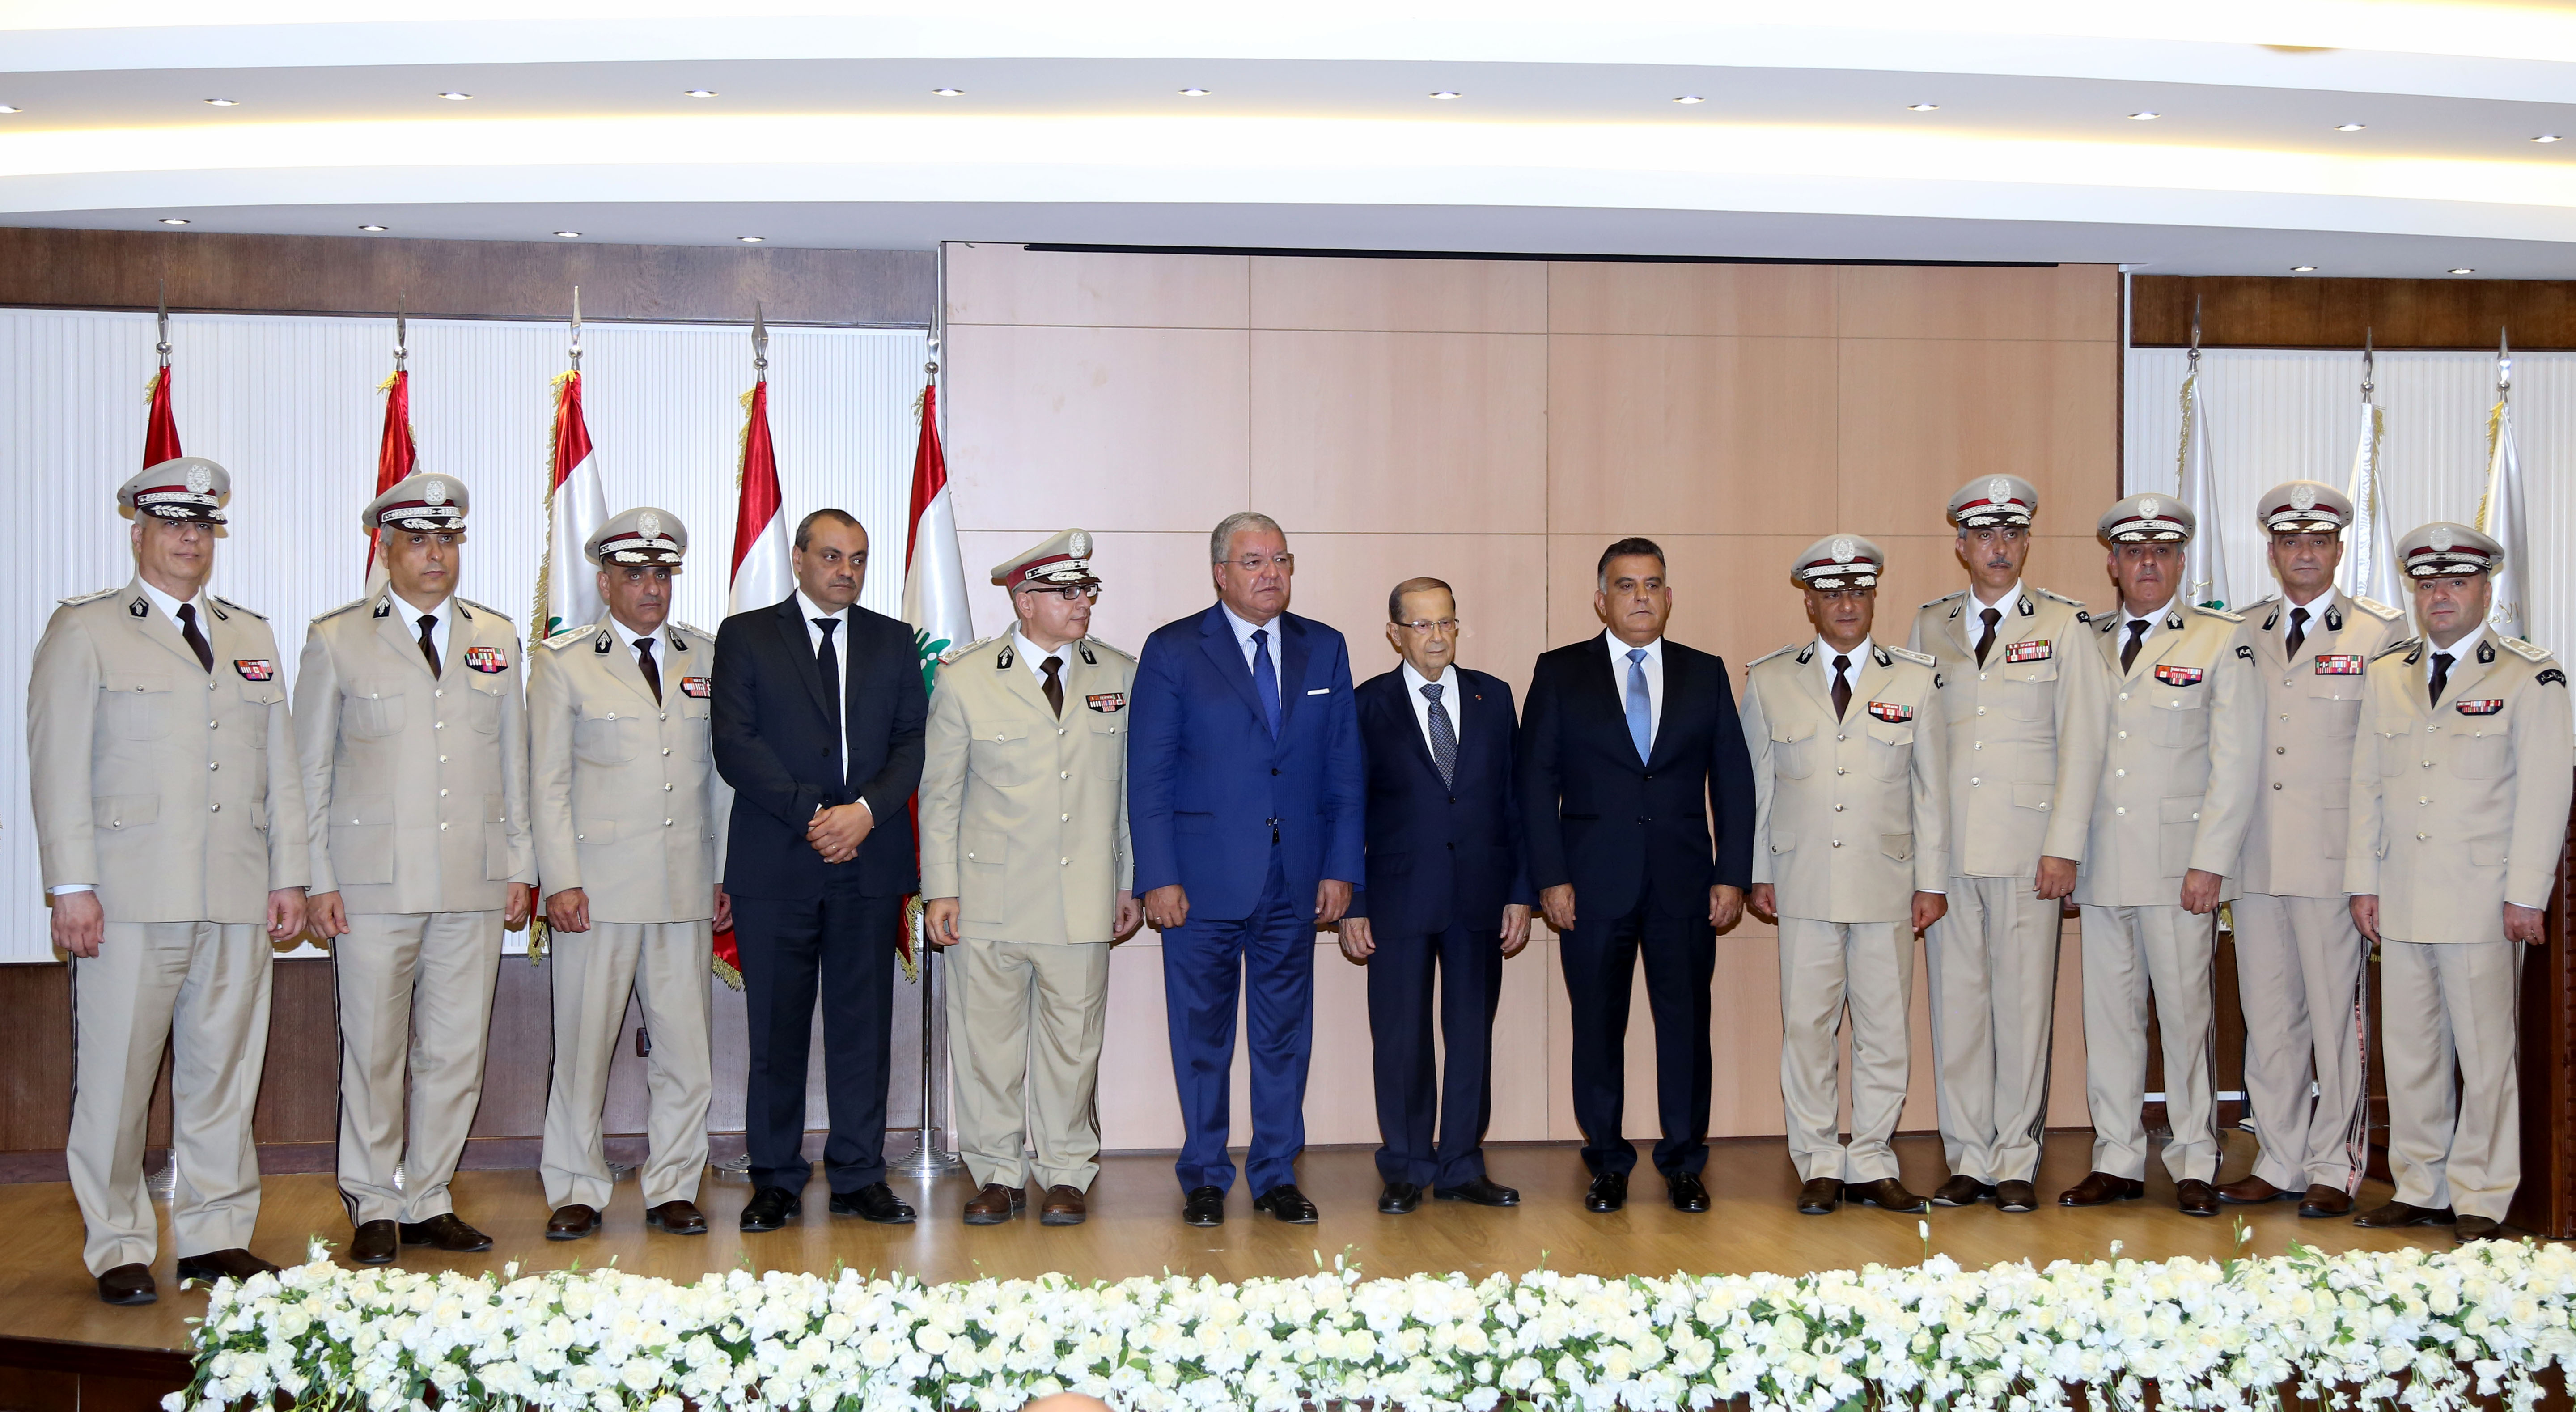 President Michel Aoun during the 72nd anniversary of the inception of Lebanon's General Security Directorate